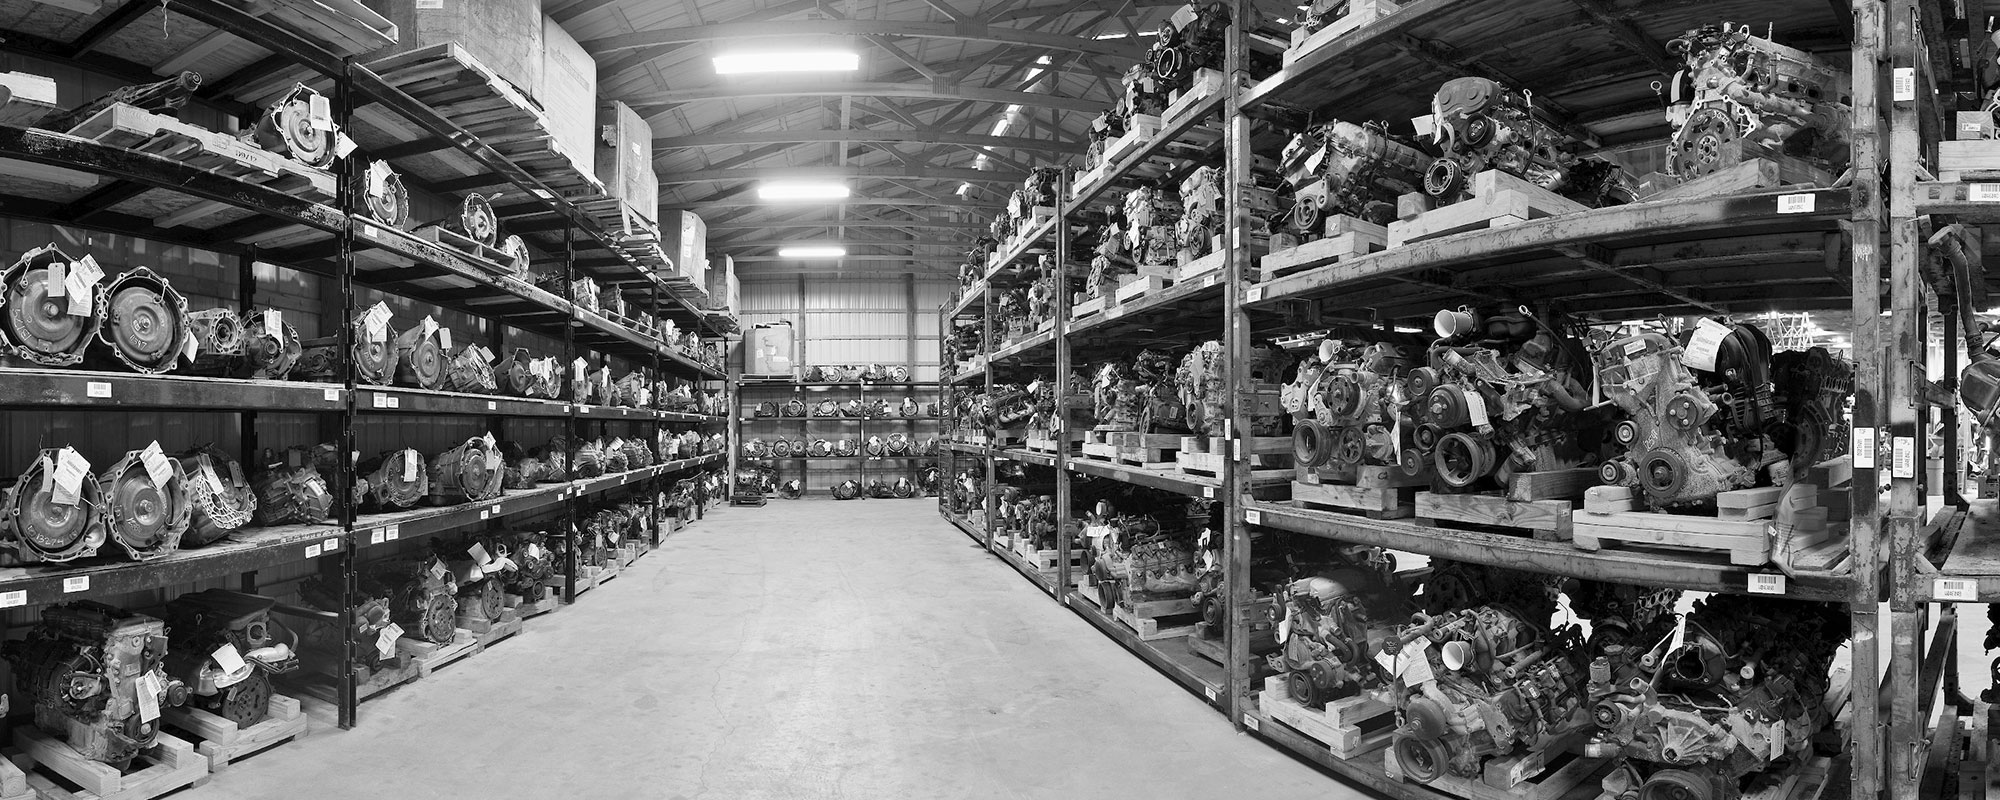 Used transmissions in the warehouse at Doug's Auto Recyclers in Coldwater, MI